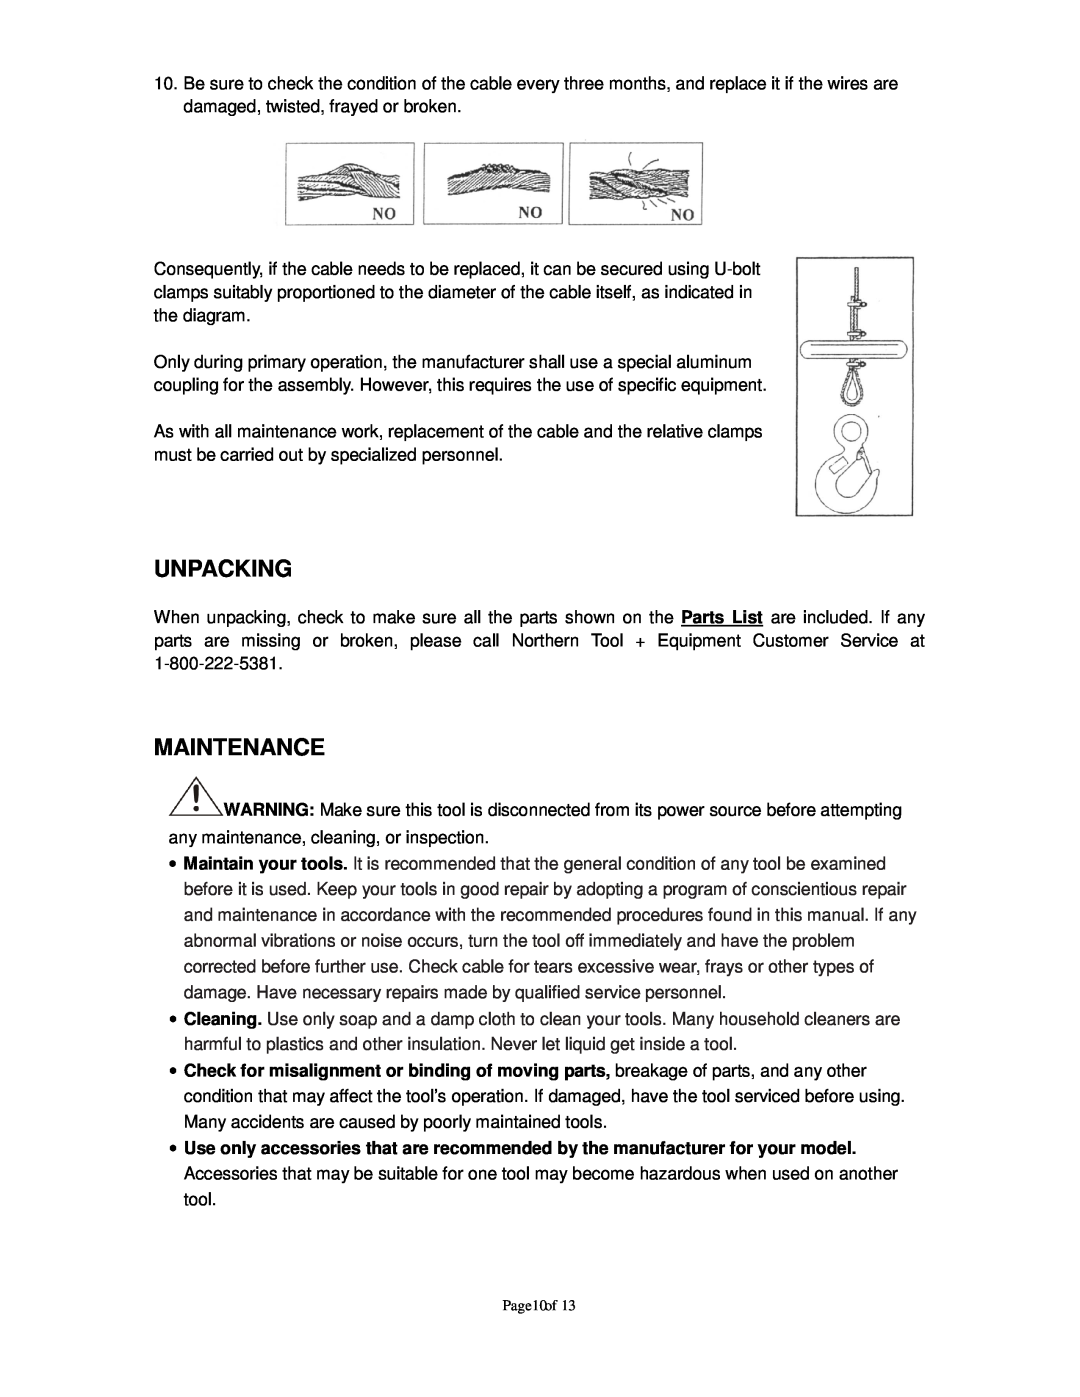 Northern Industrial Tools 142264 owner manual Unpacking, Maintenance, Page10of 